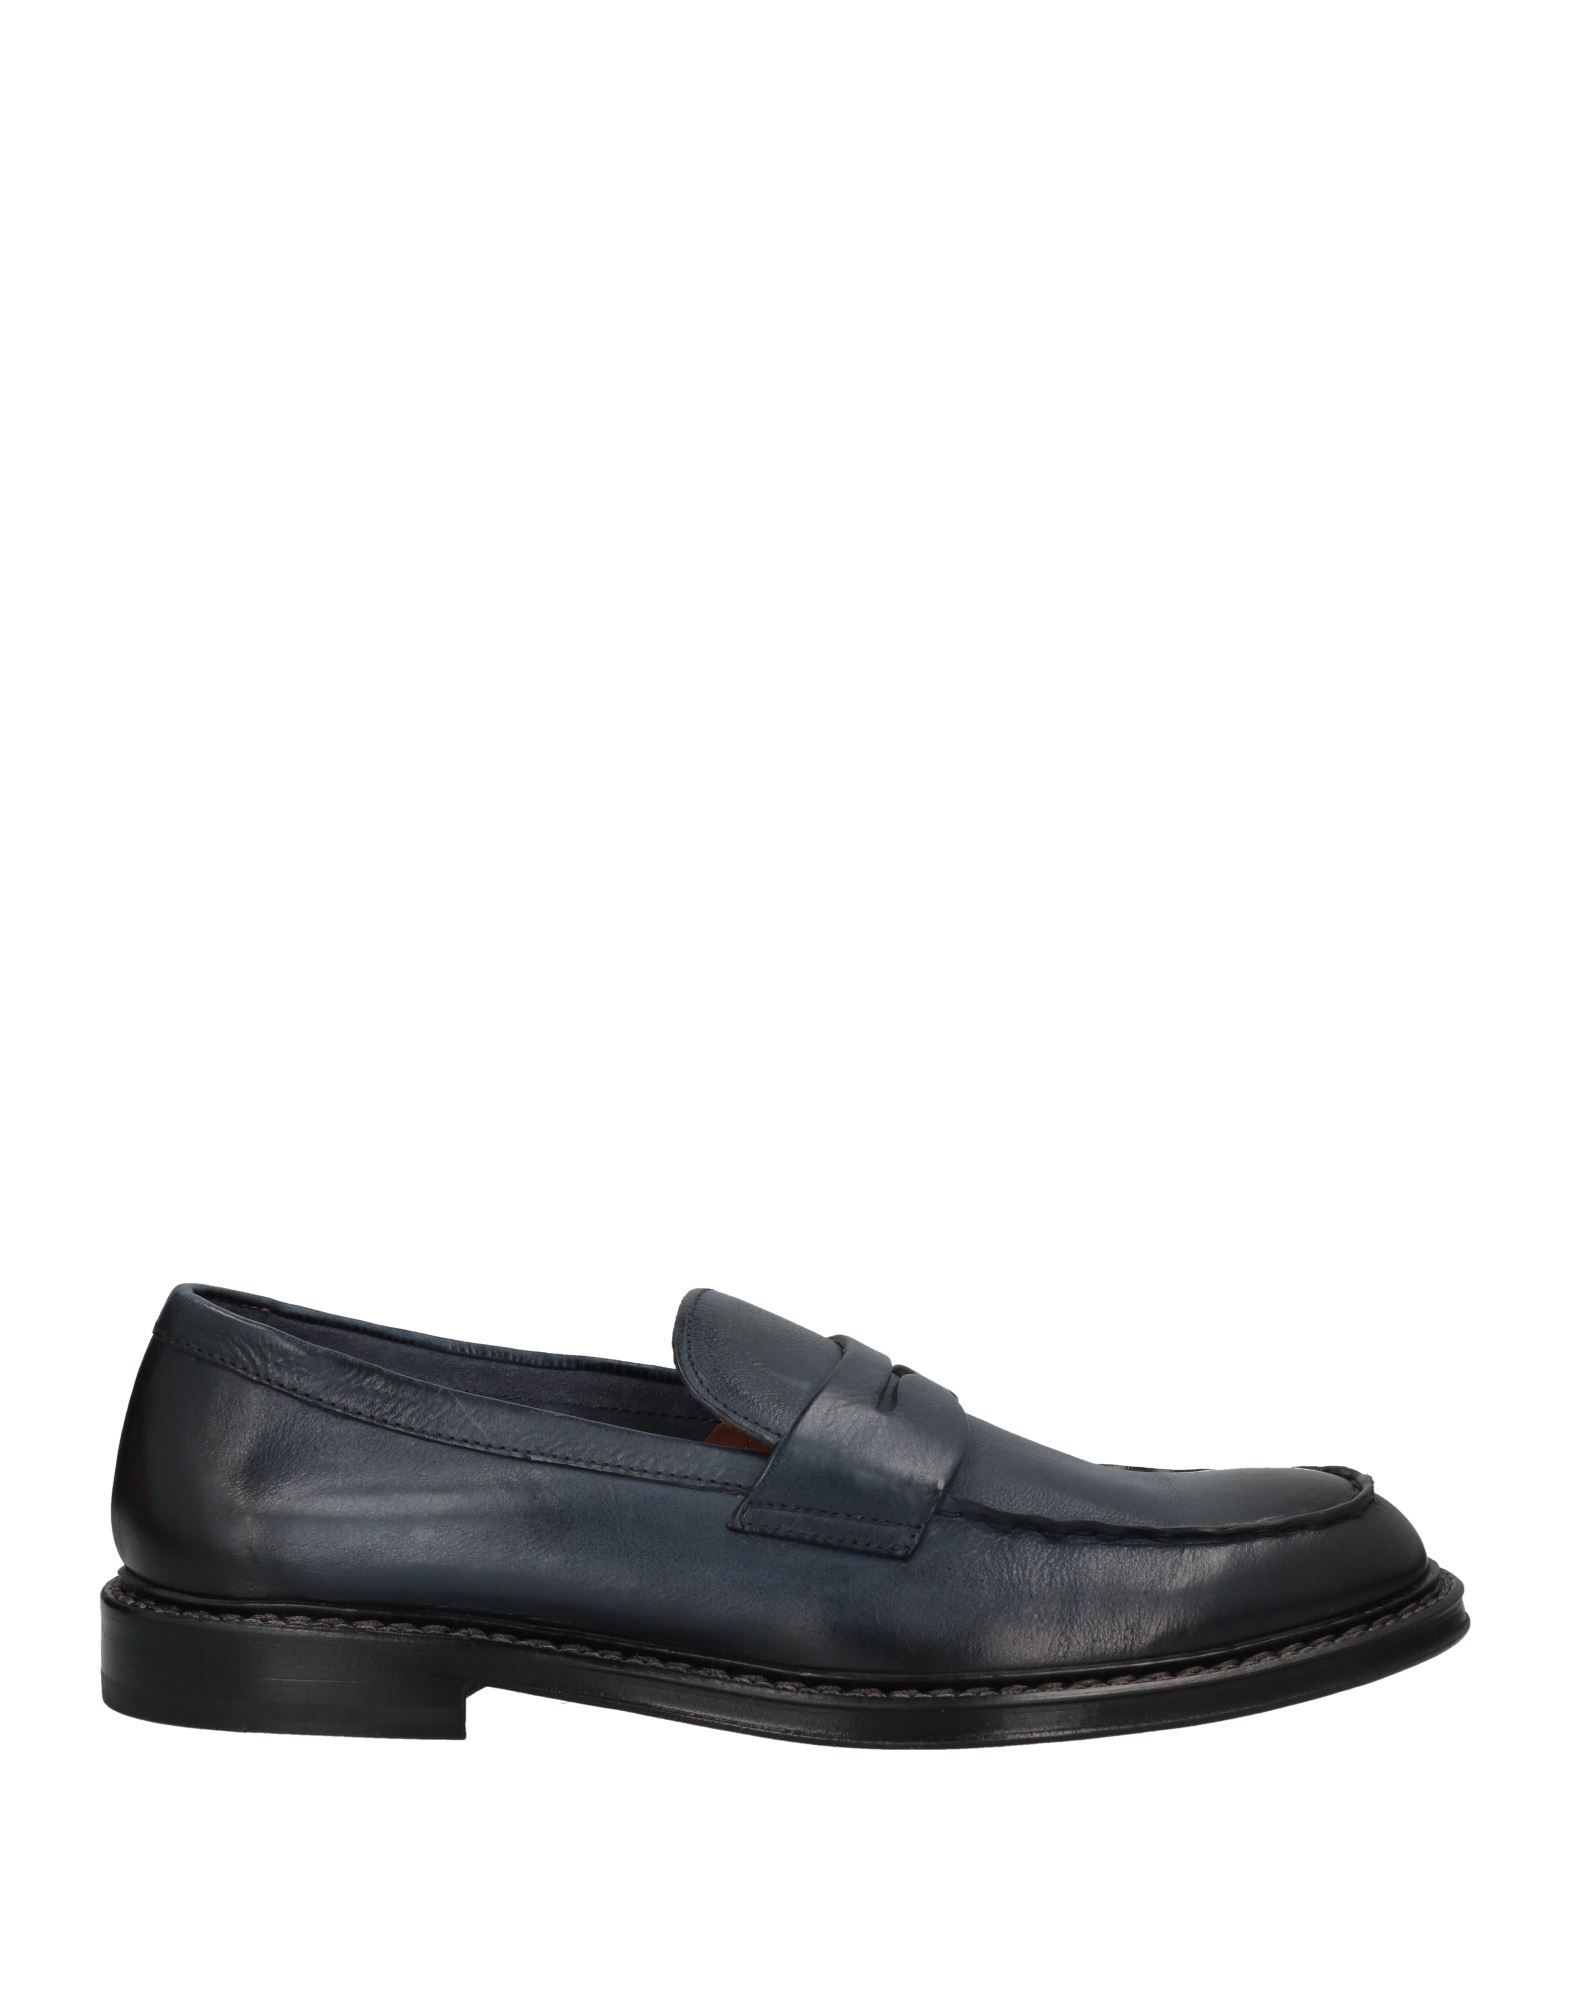 Doucal's Loafers In Navy Blue